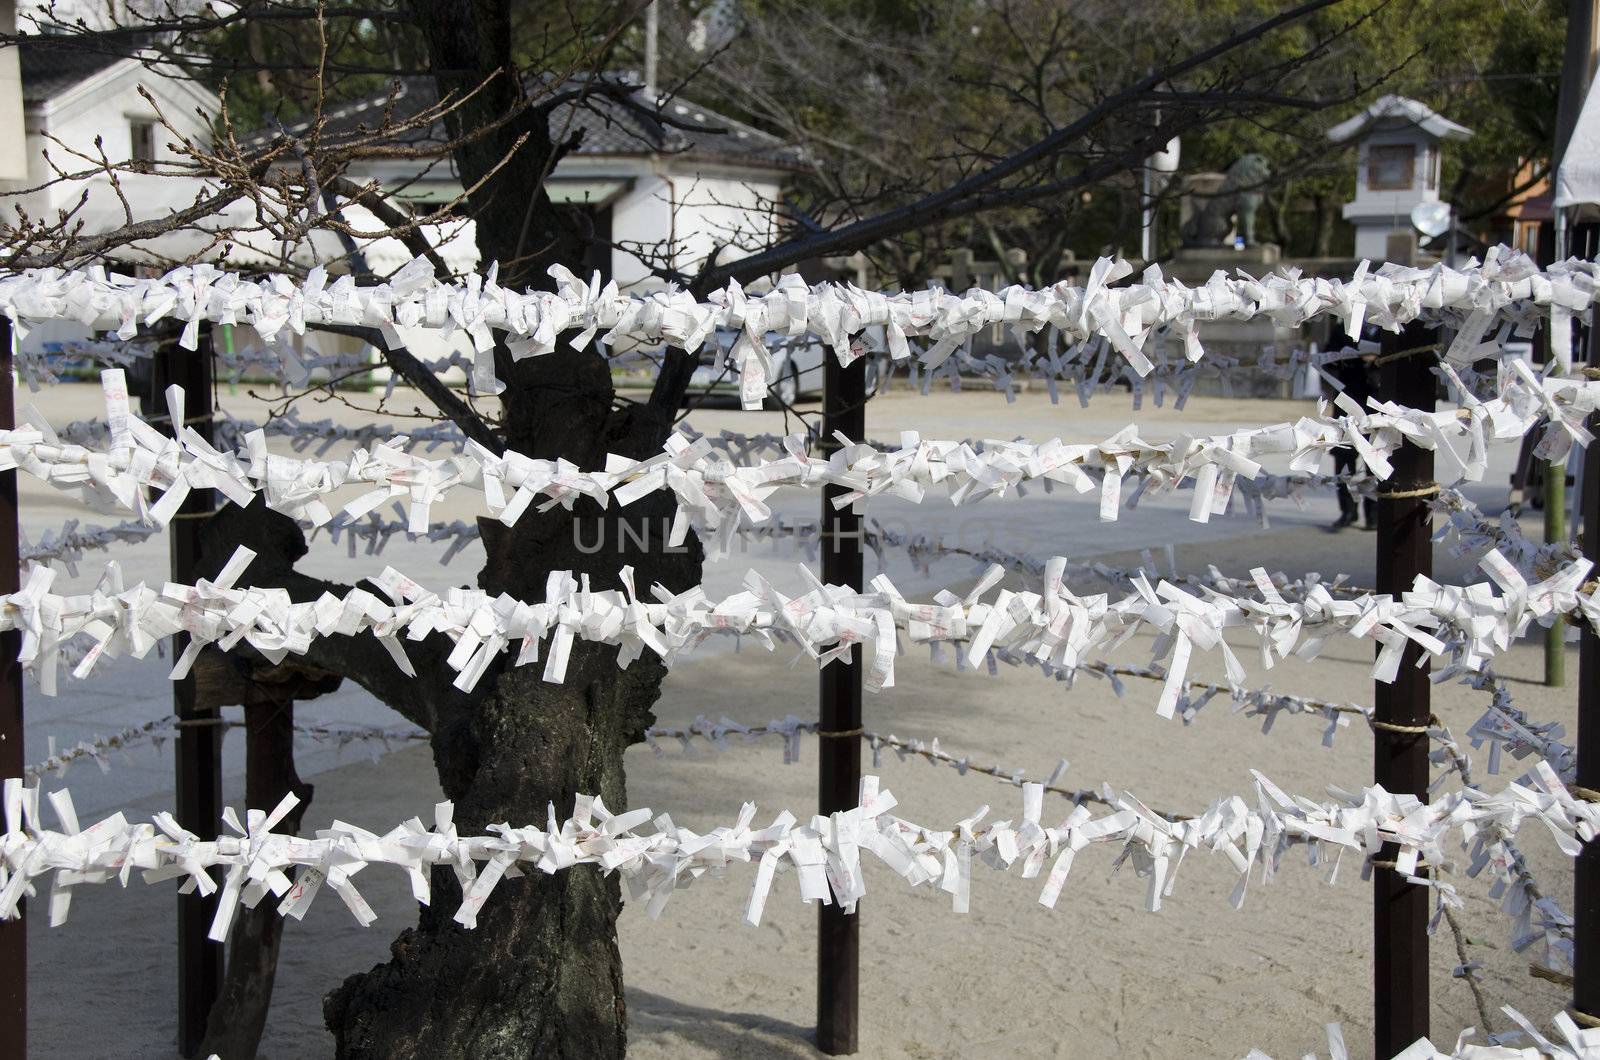 Typical Omikuji at a japanese Shrine in four rows